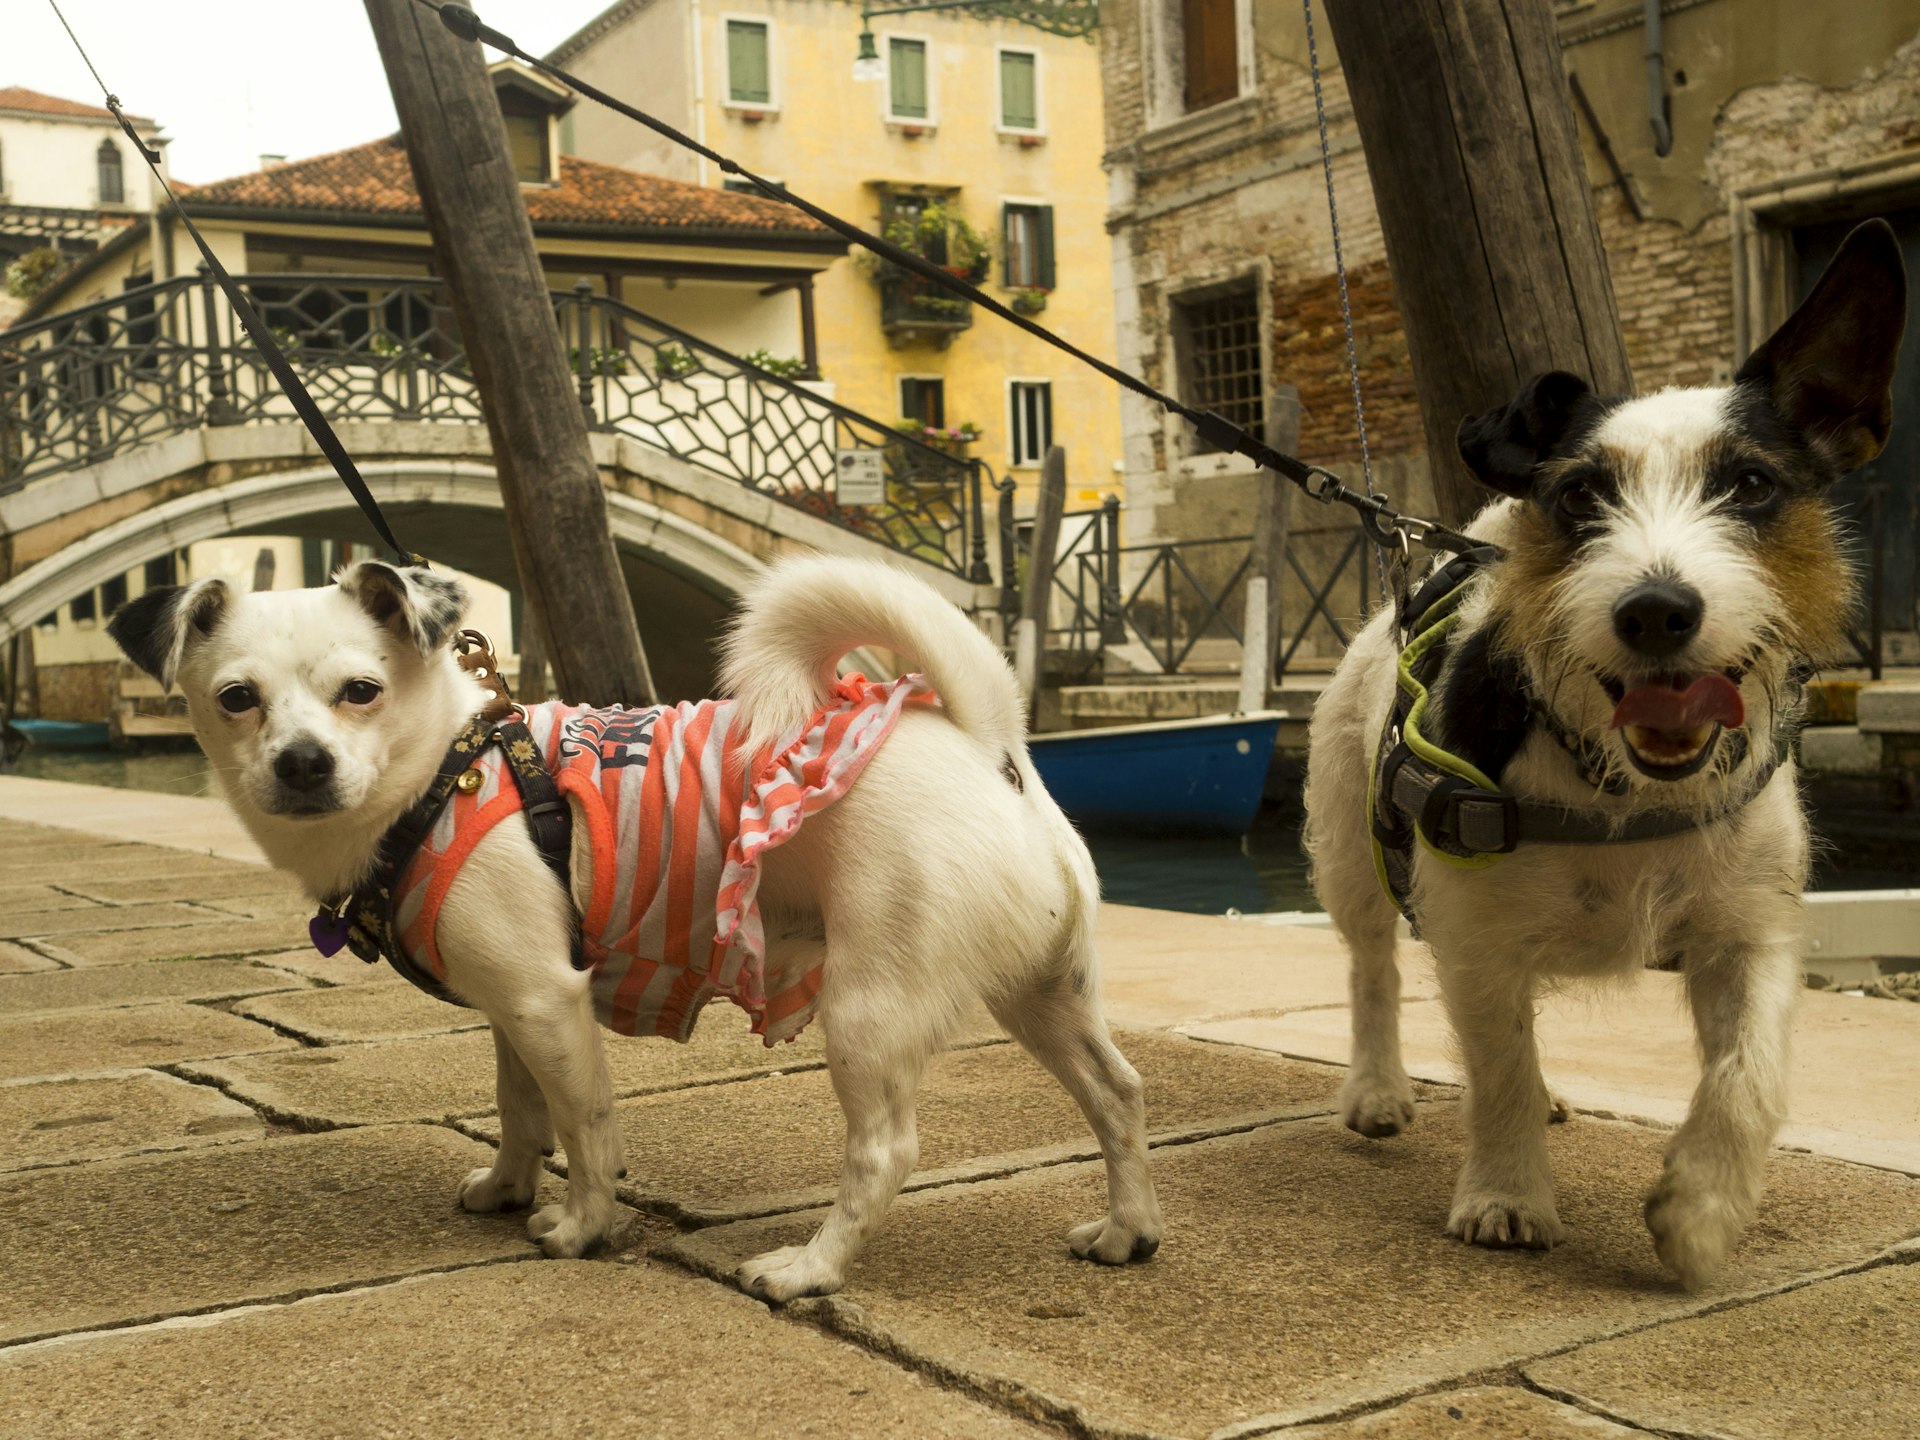 Two short-haired terriers on a Venice street